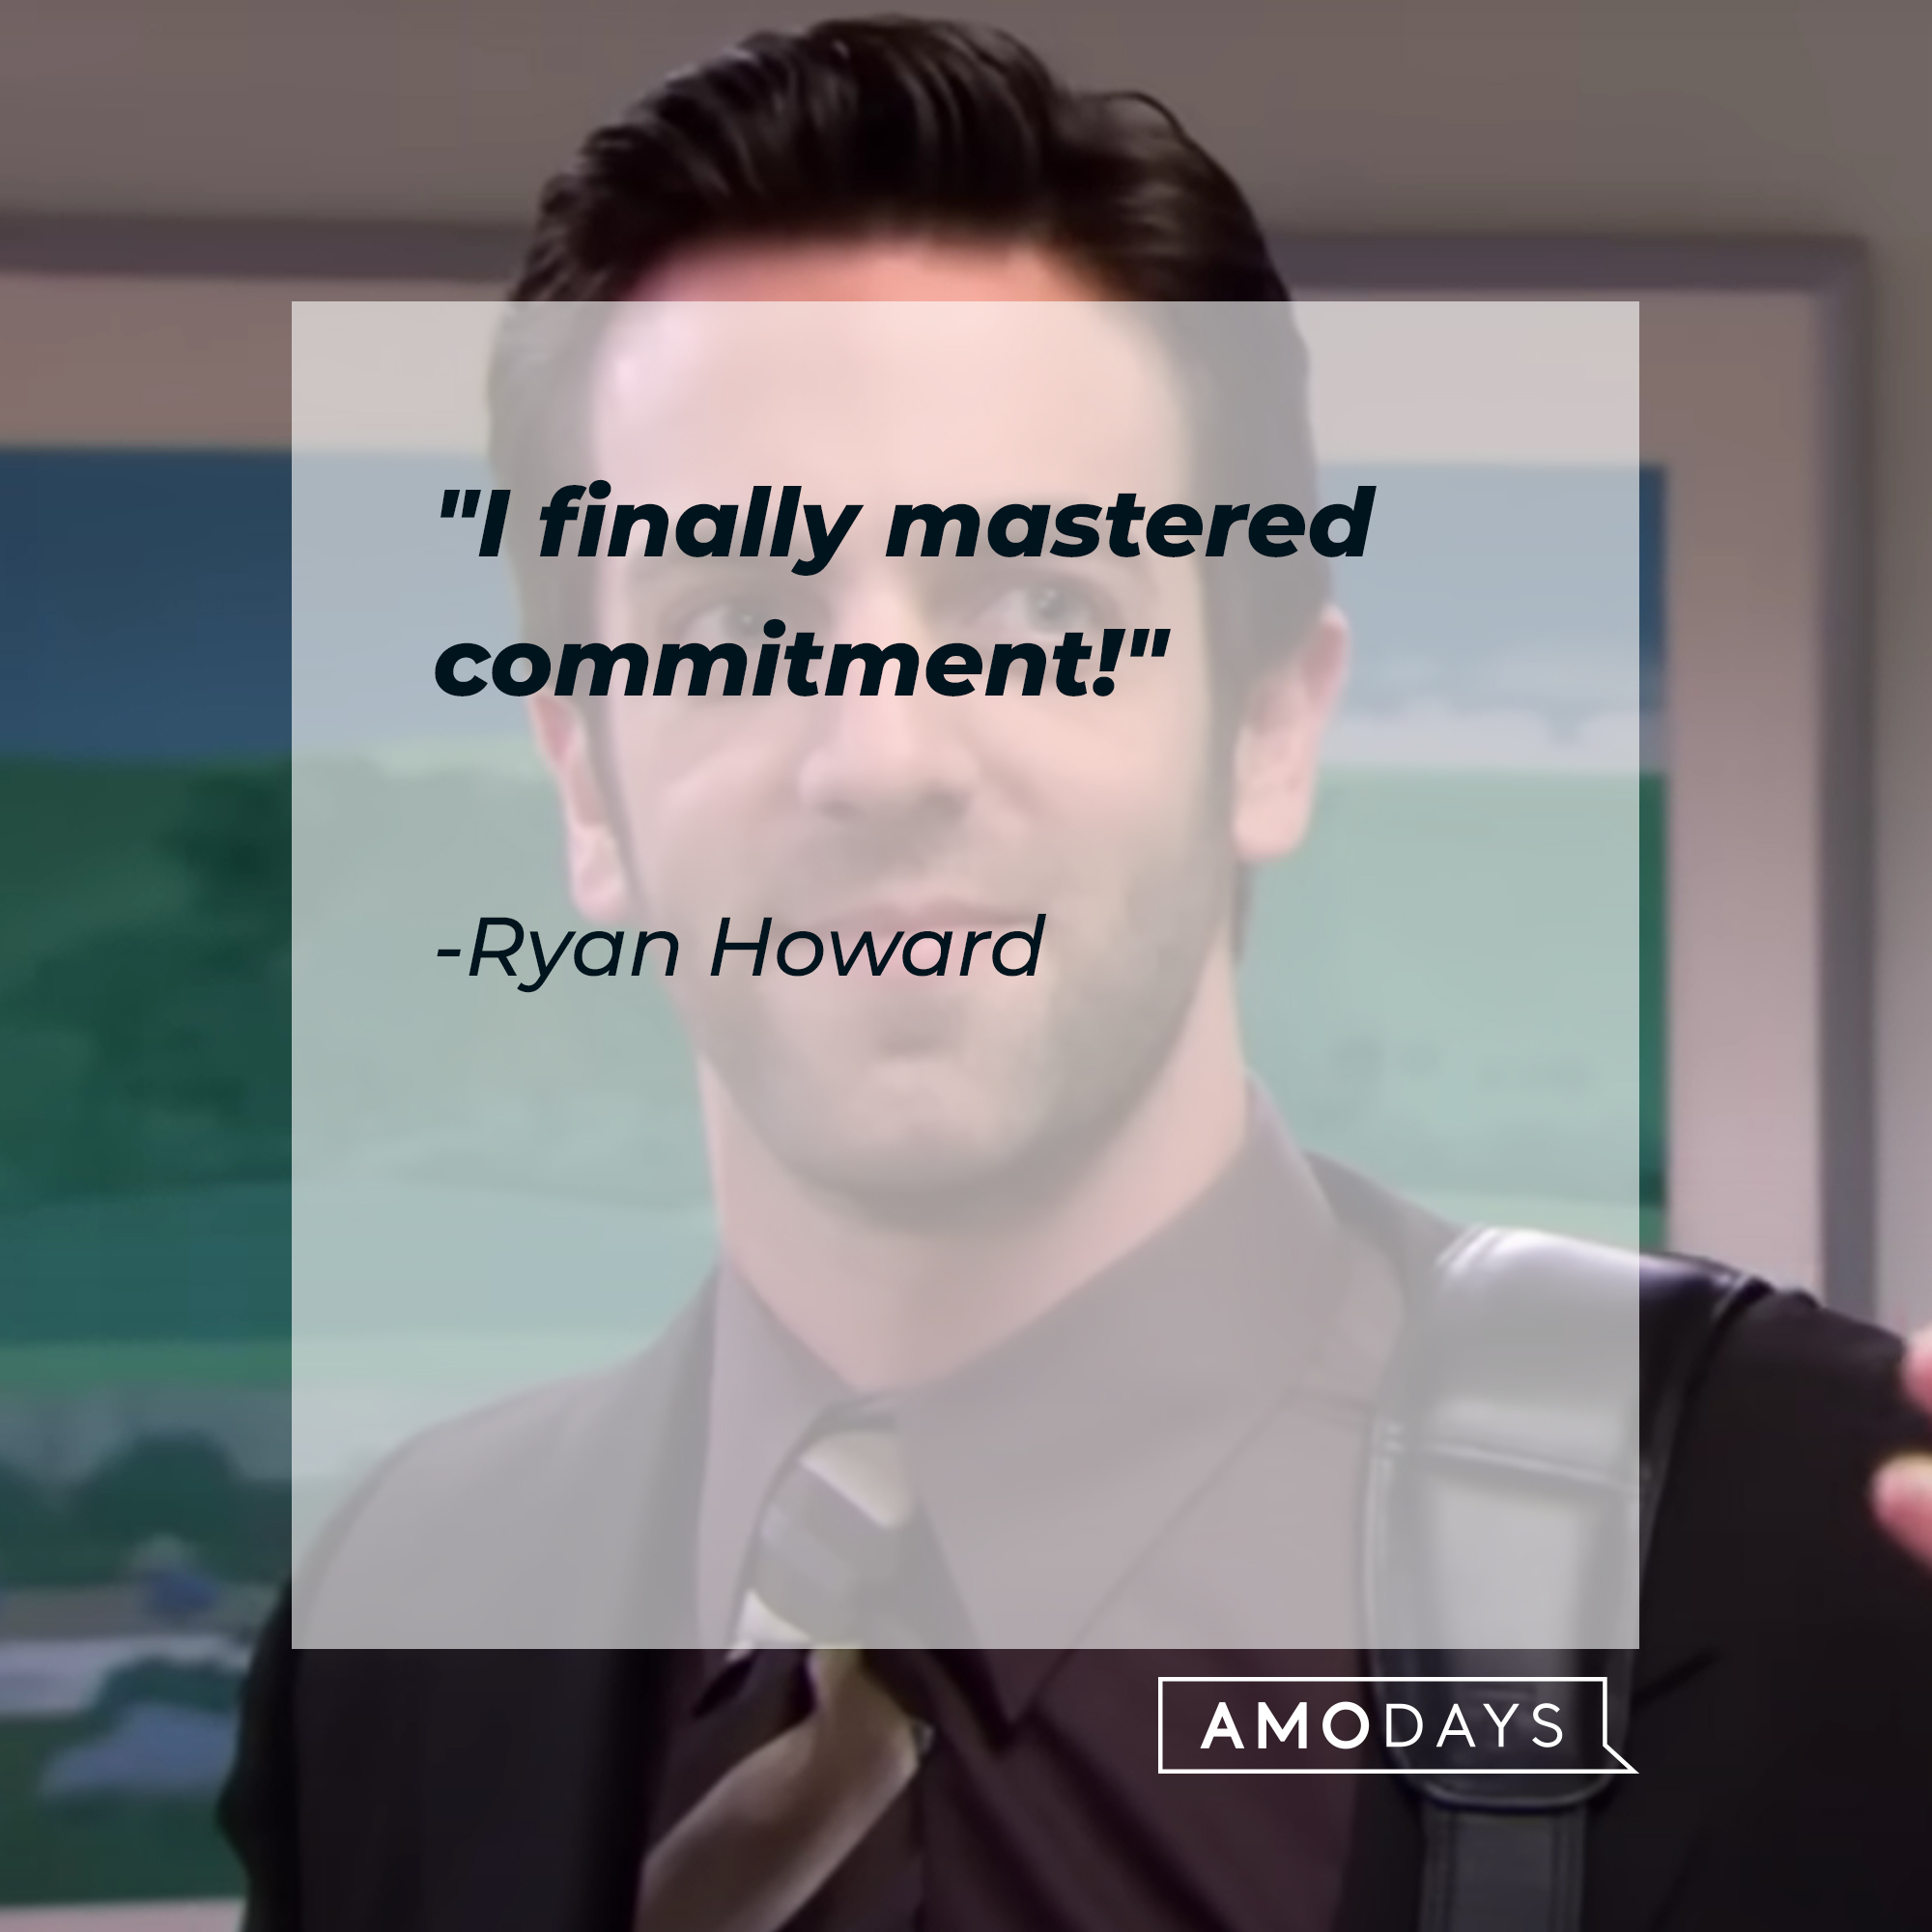 Ryan Howard's quote: "I finally mastered commitment." | Source: YouTube/TheOffice